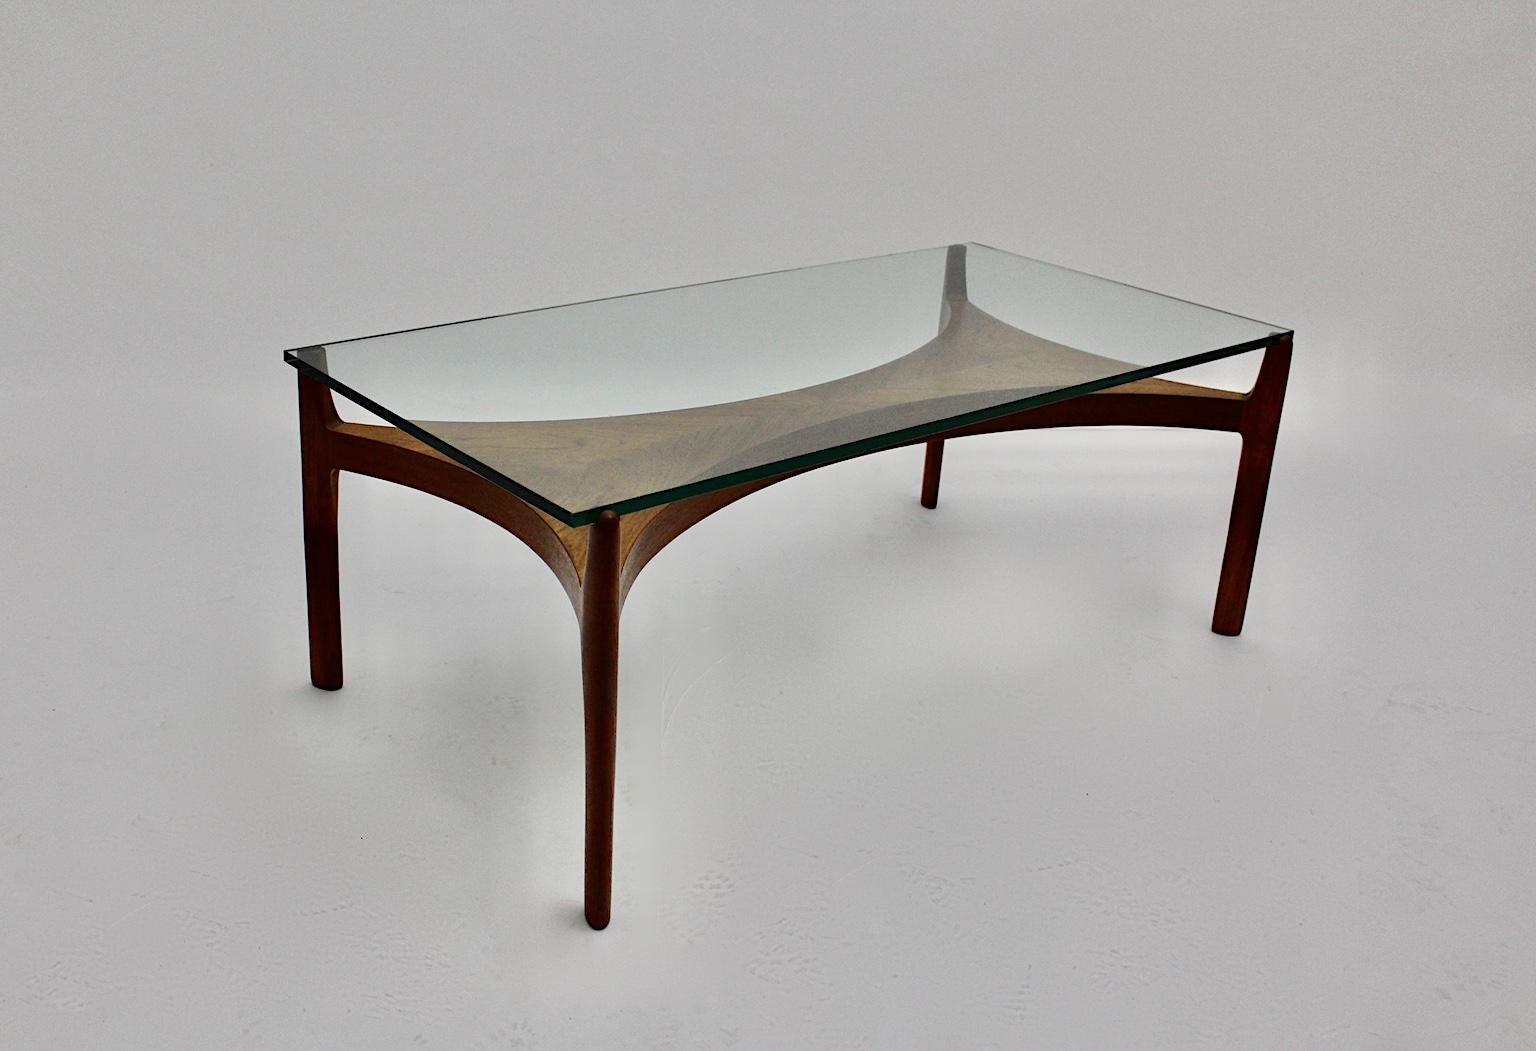 Scandinavian Modern Vintage Teak Glass Coffee Table by Sven Ellekaer, 1960s In Good Condition For Sale In Vienna, AT